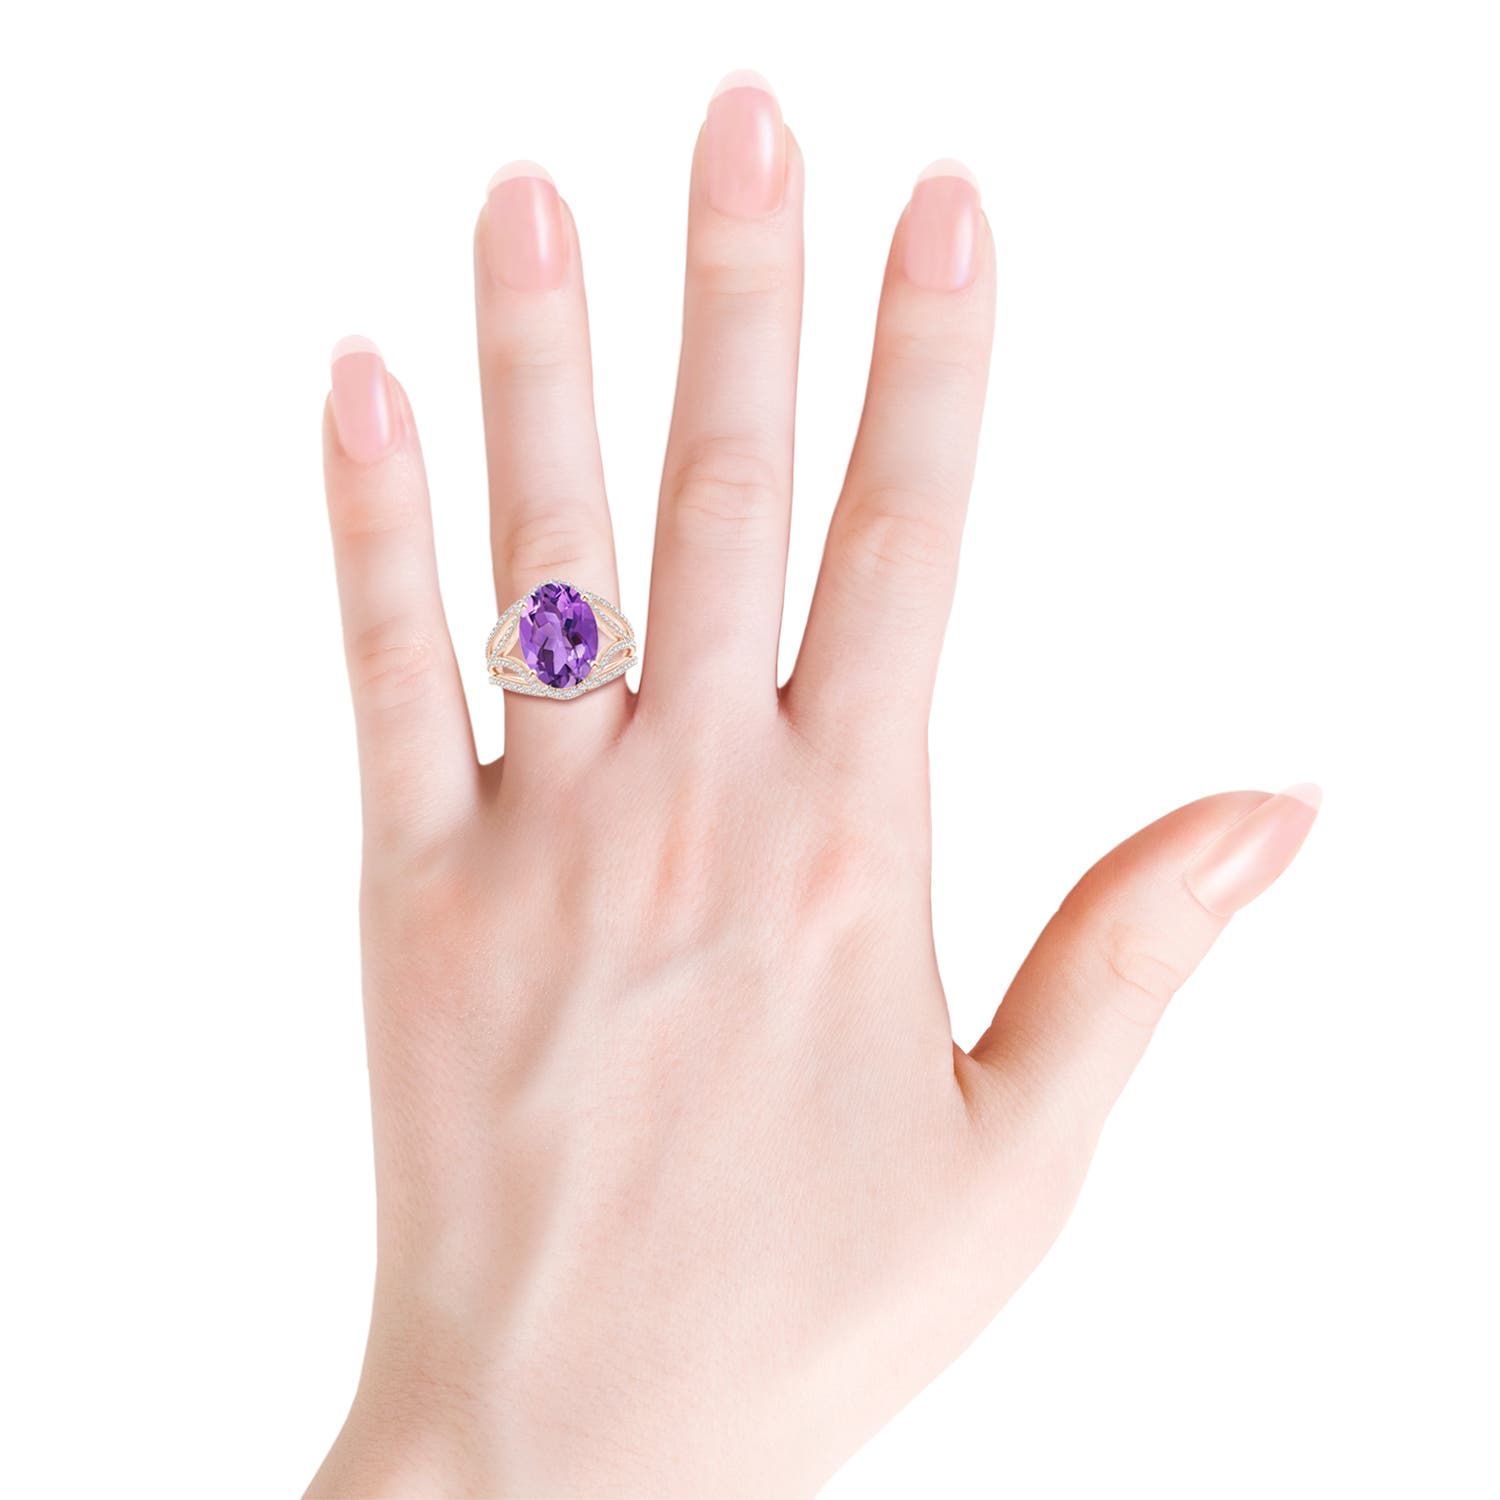 AA - Amethyst / 5.89 CT / 14 KT Rose Gold